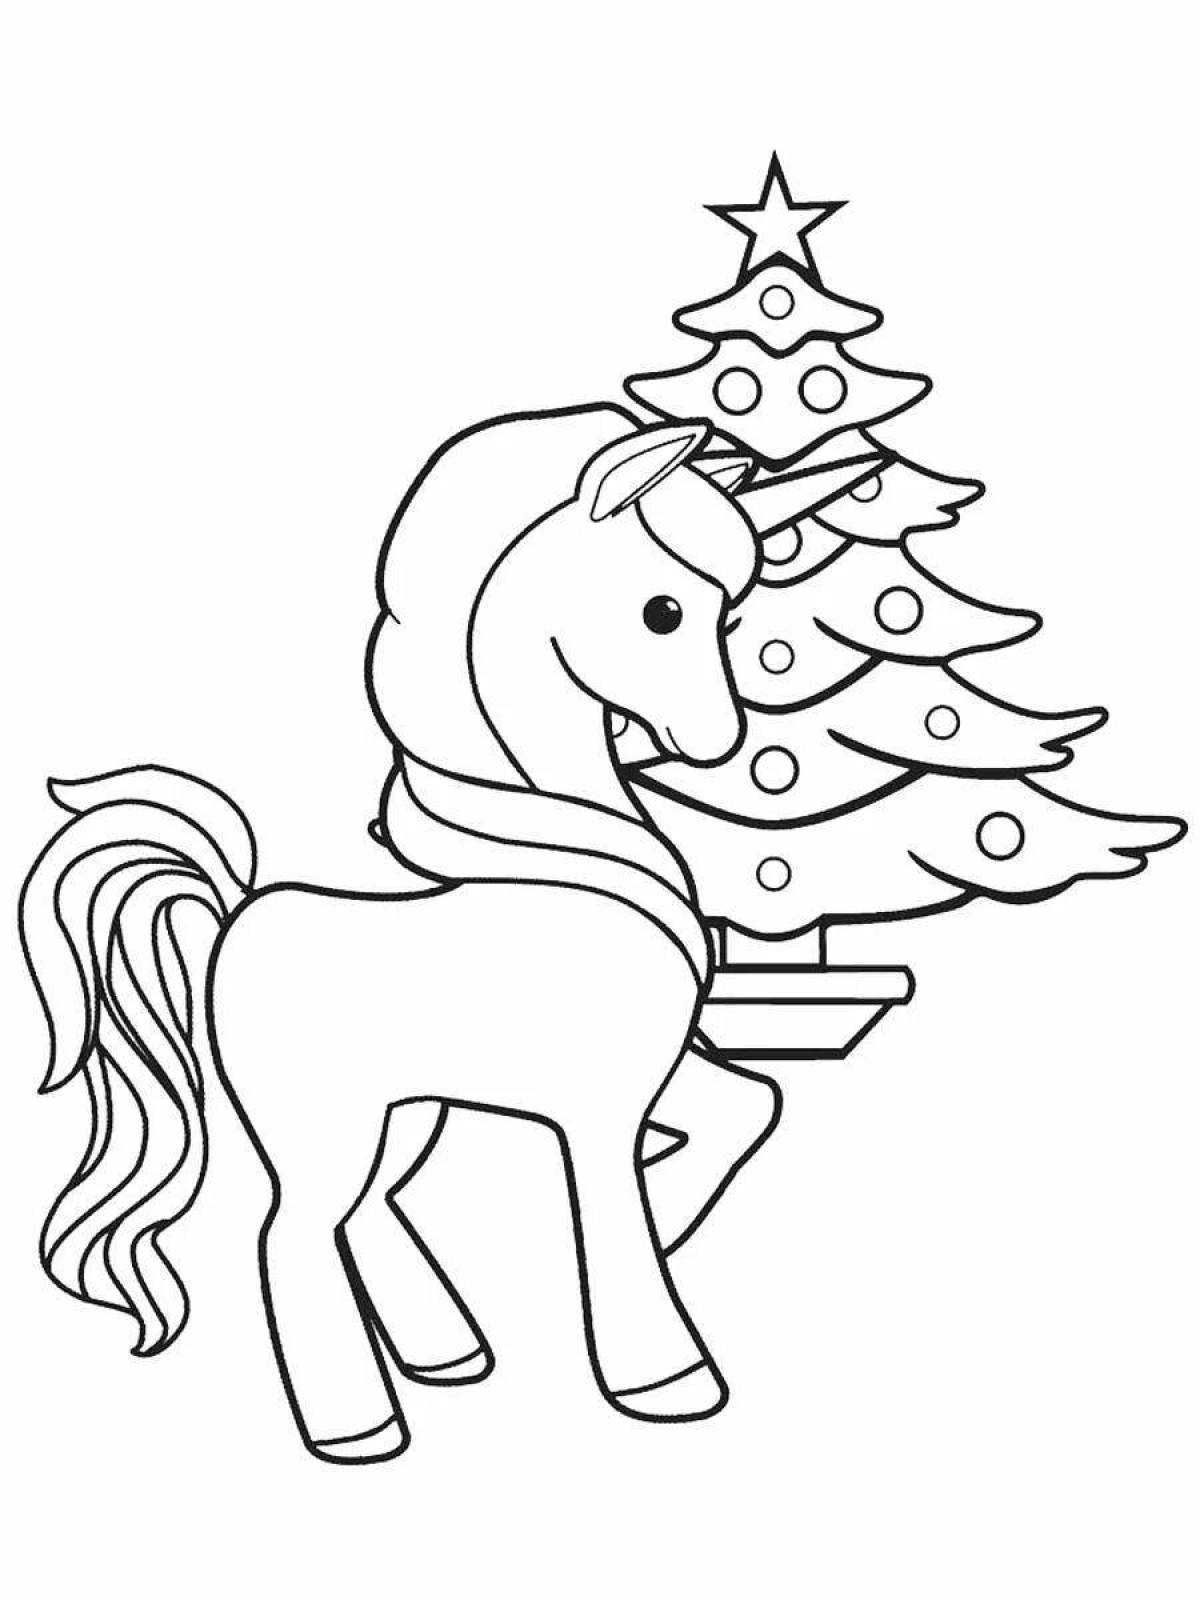 Majestic New Year's unicorn coloring page